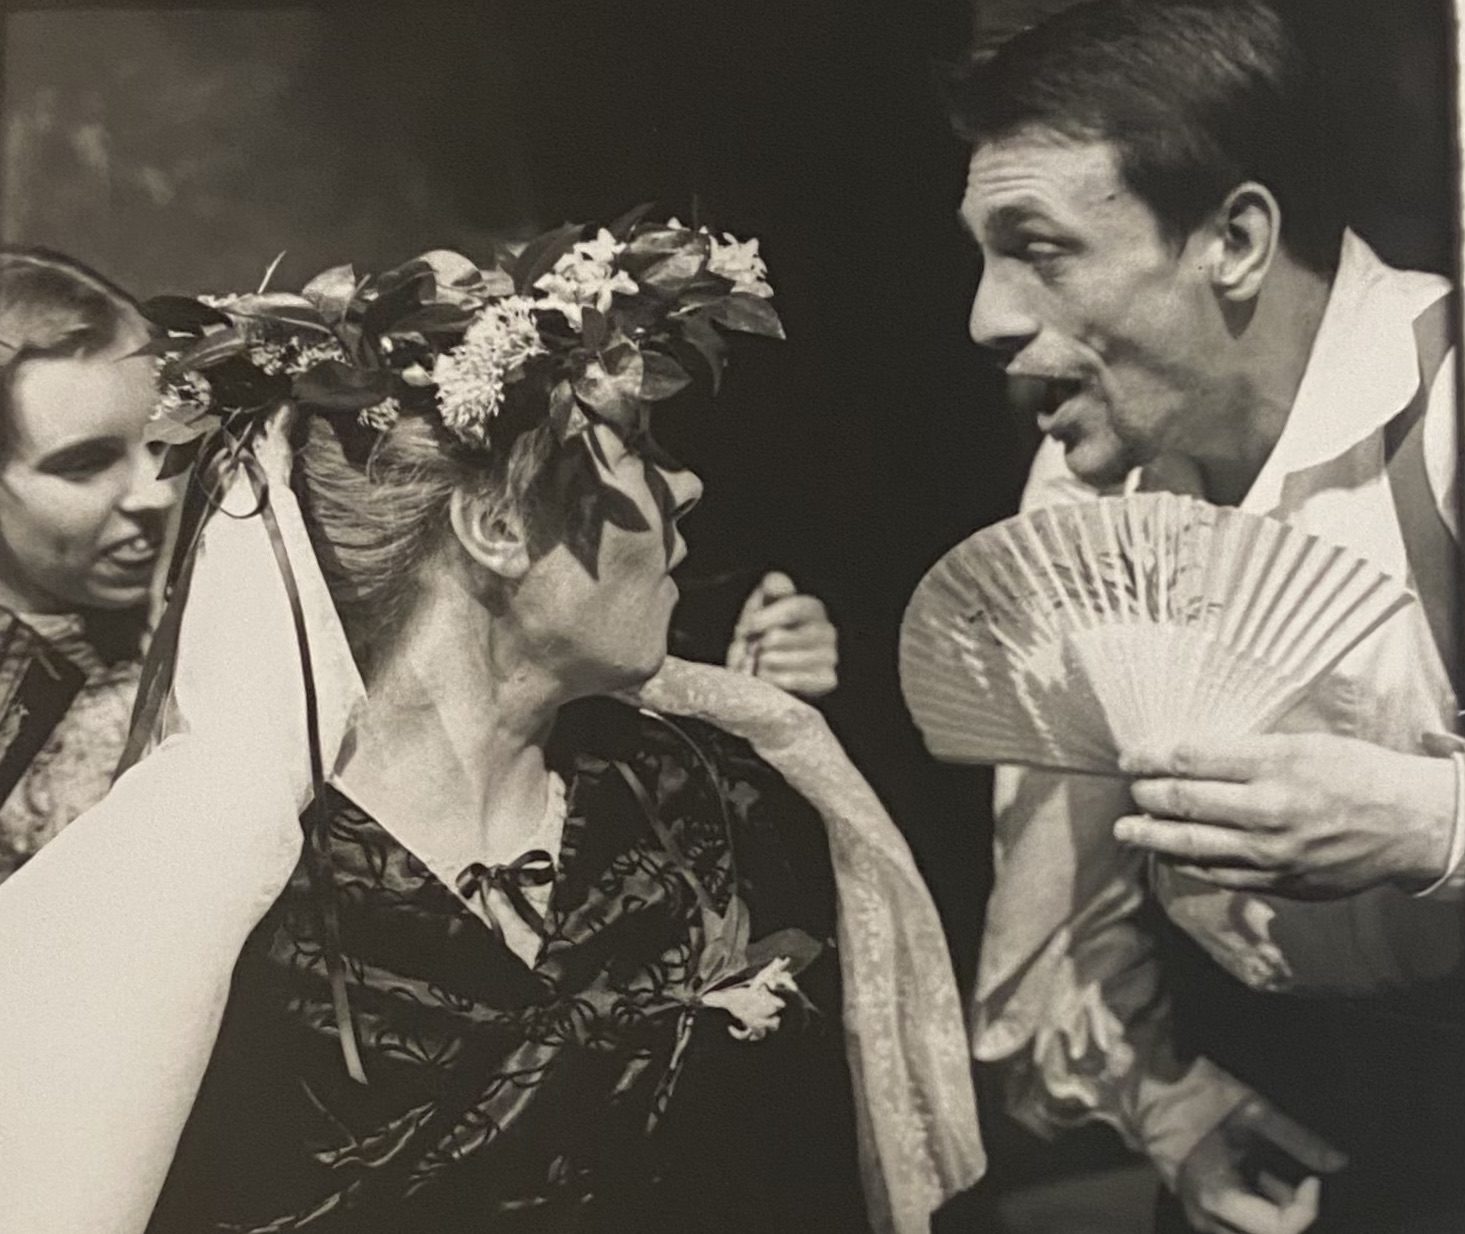 Black and white image of two performers. One holds a fan and the other has a floral headdress on. they are both looking at each other.